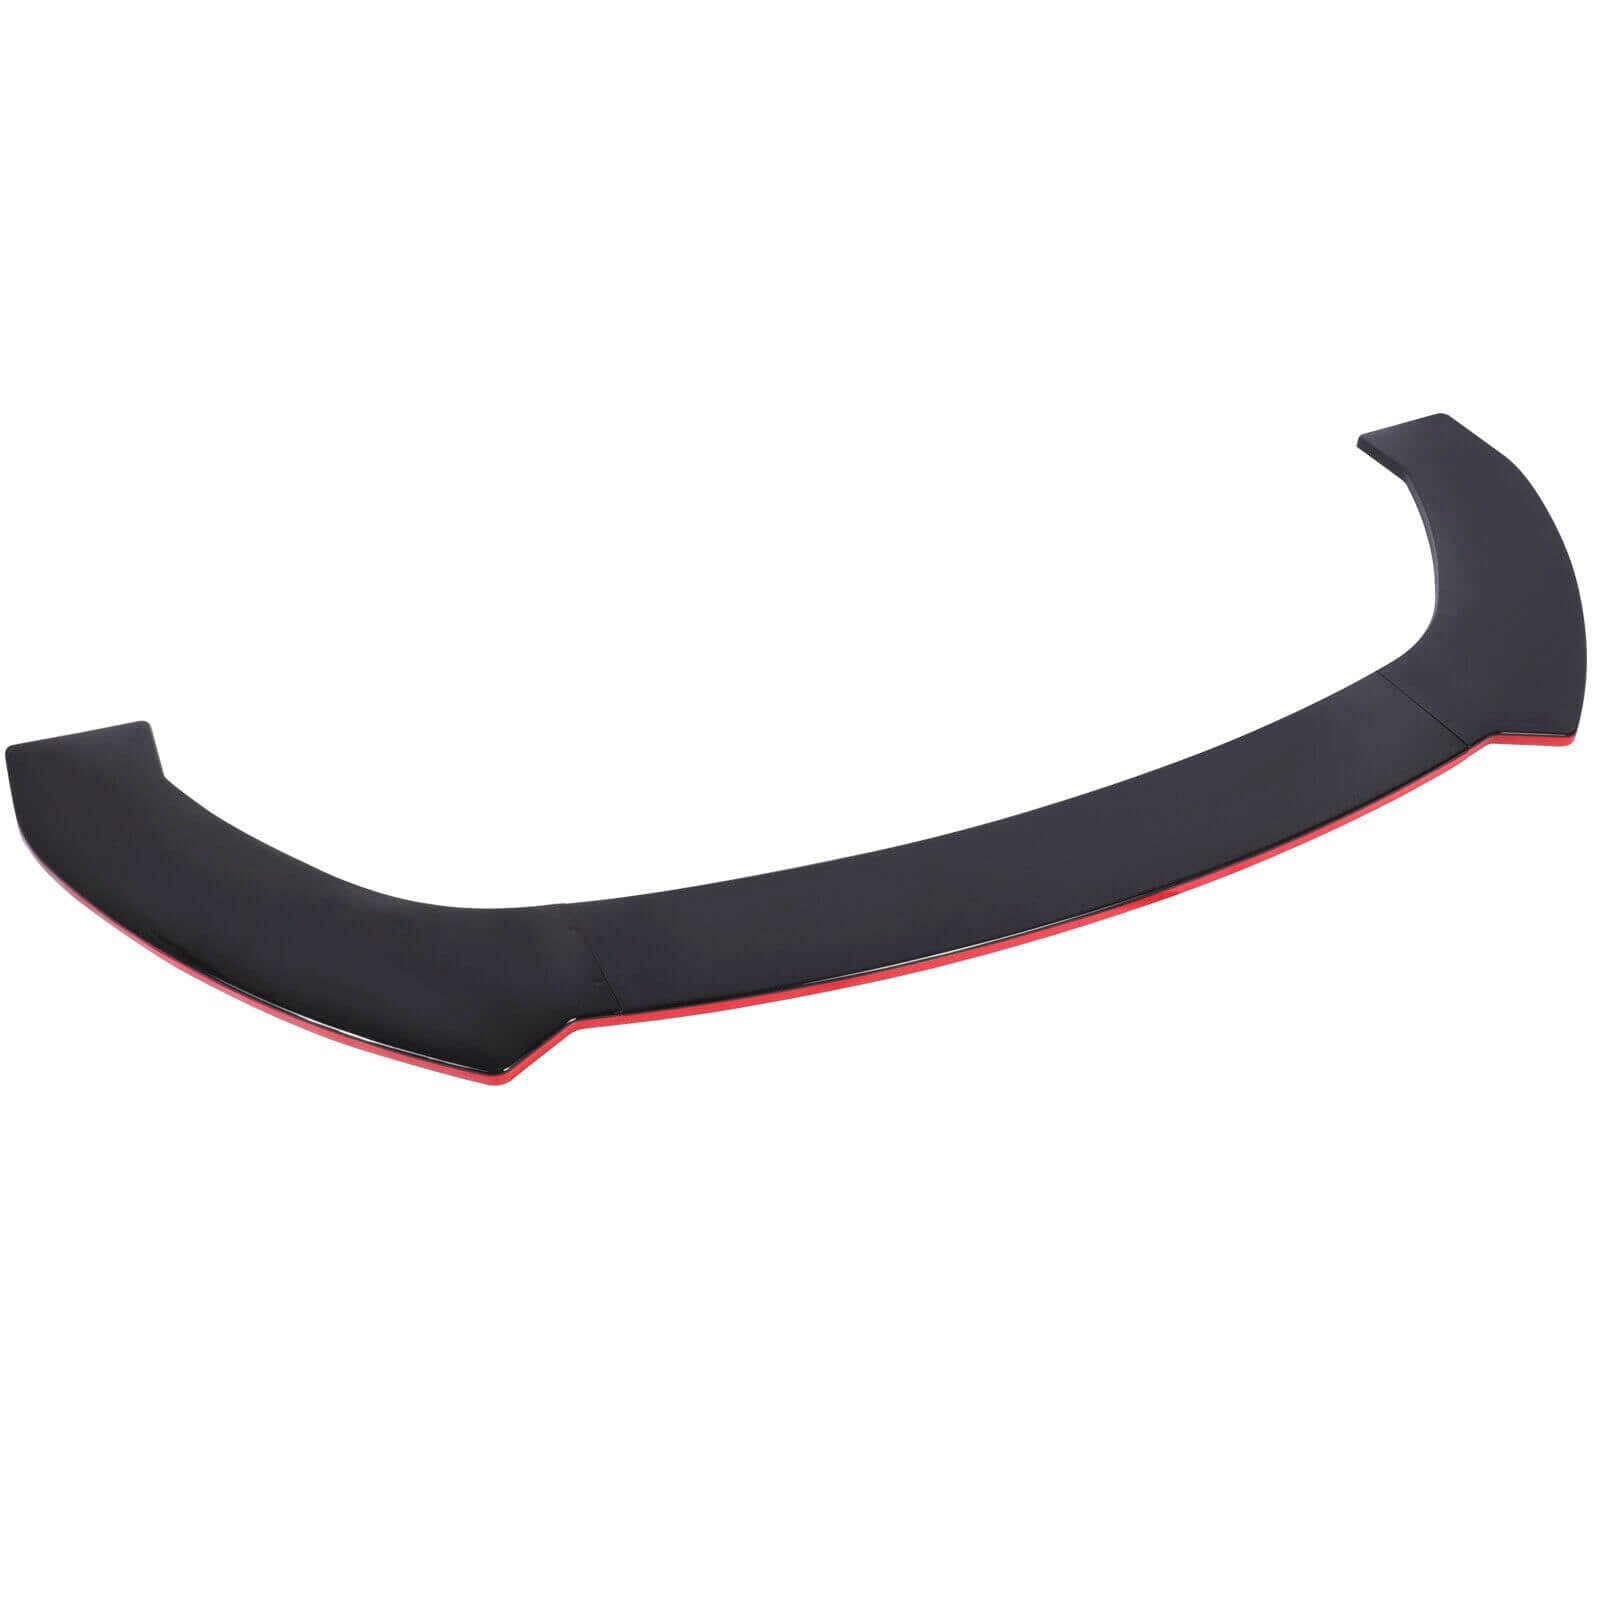 Red of Universal Front Bumper Lip Trim to Fit